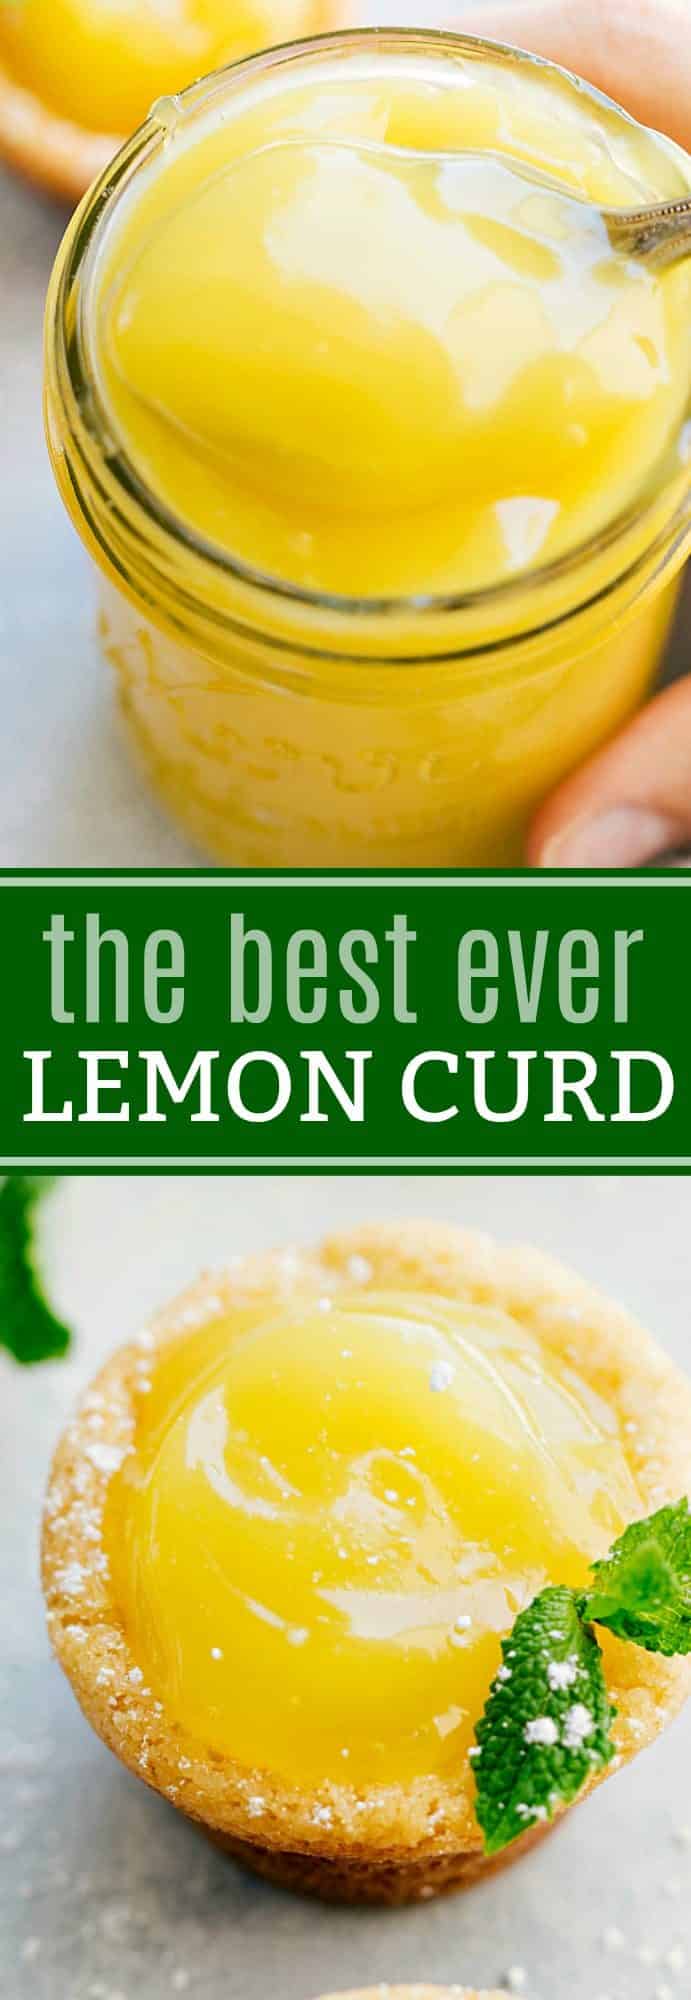 The BEST EVER easy lemon curd! Plus tons of ways to serve lemon curd and elevate ordinary desserts and dishes! chelseasmessyapron.com